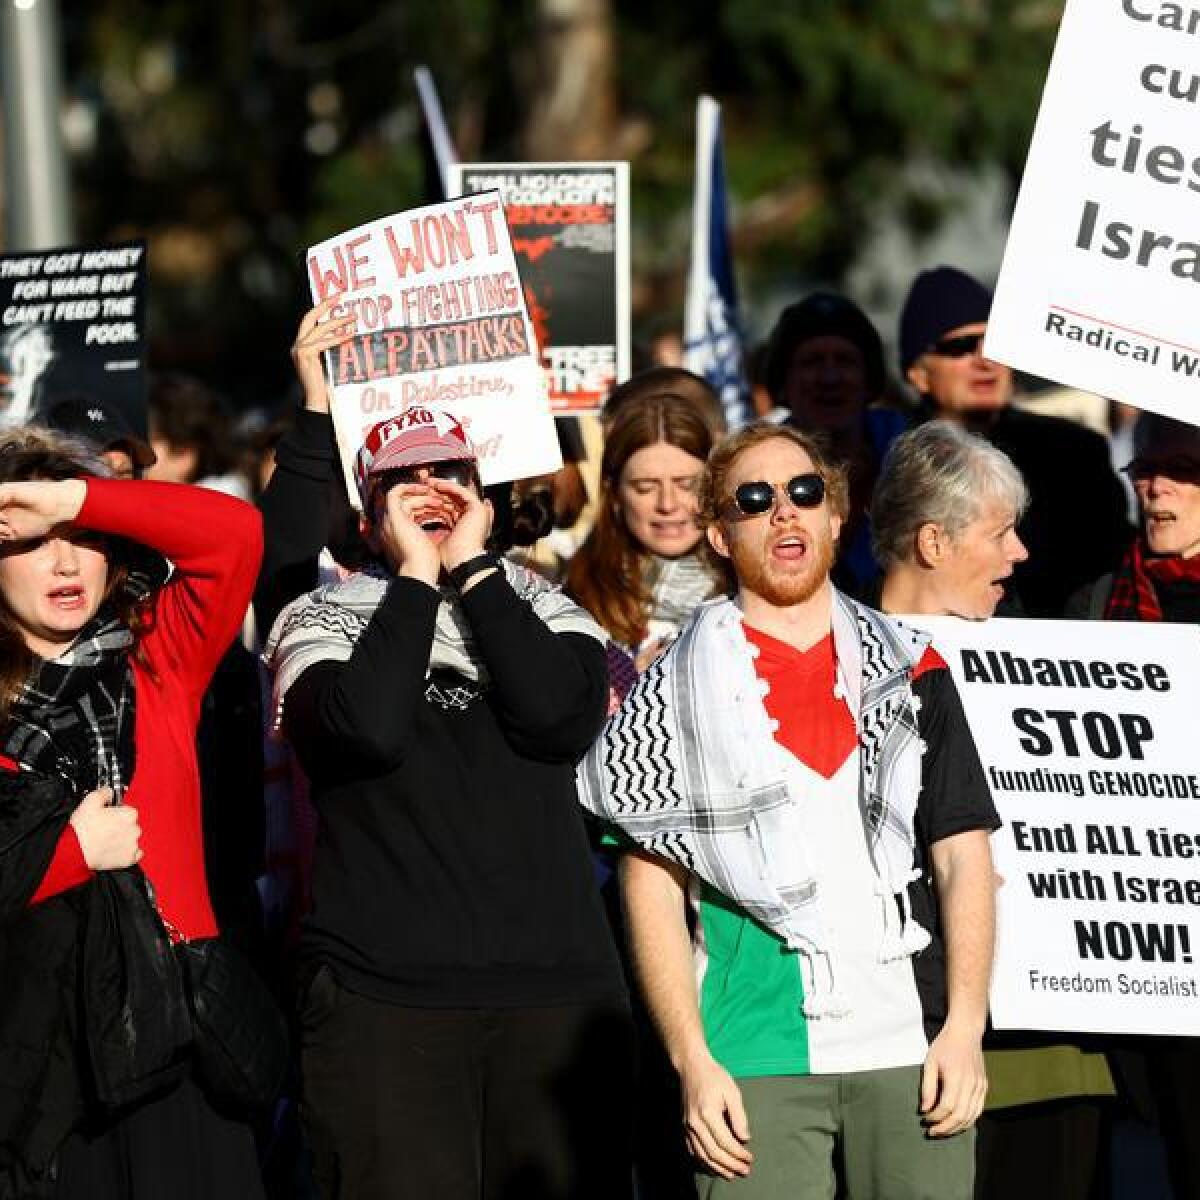 Activists at the Pro-Palestine rally